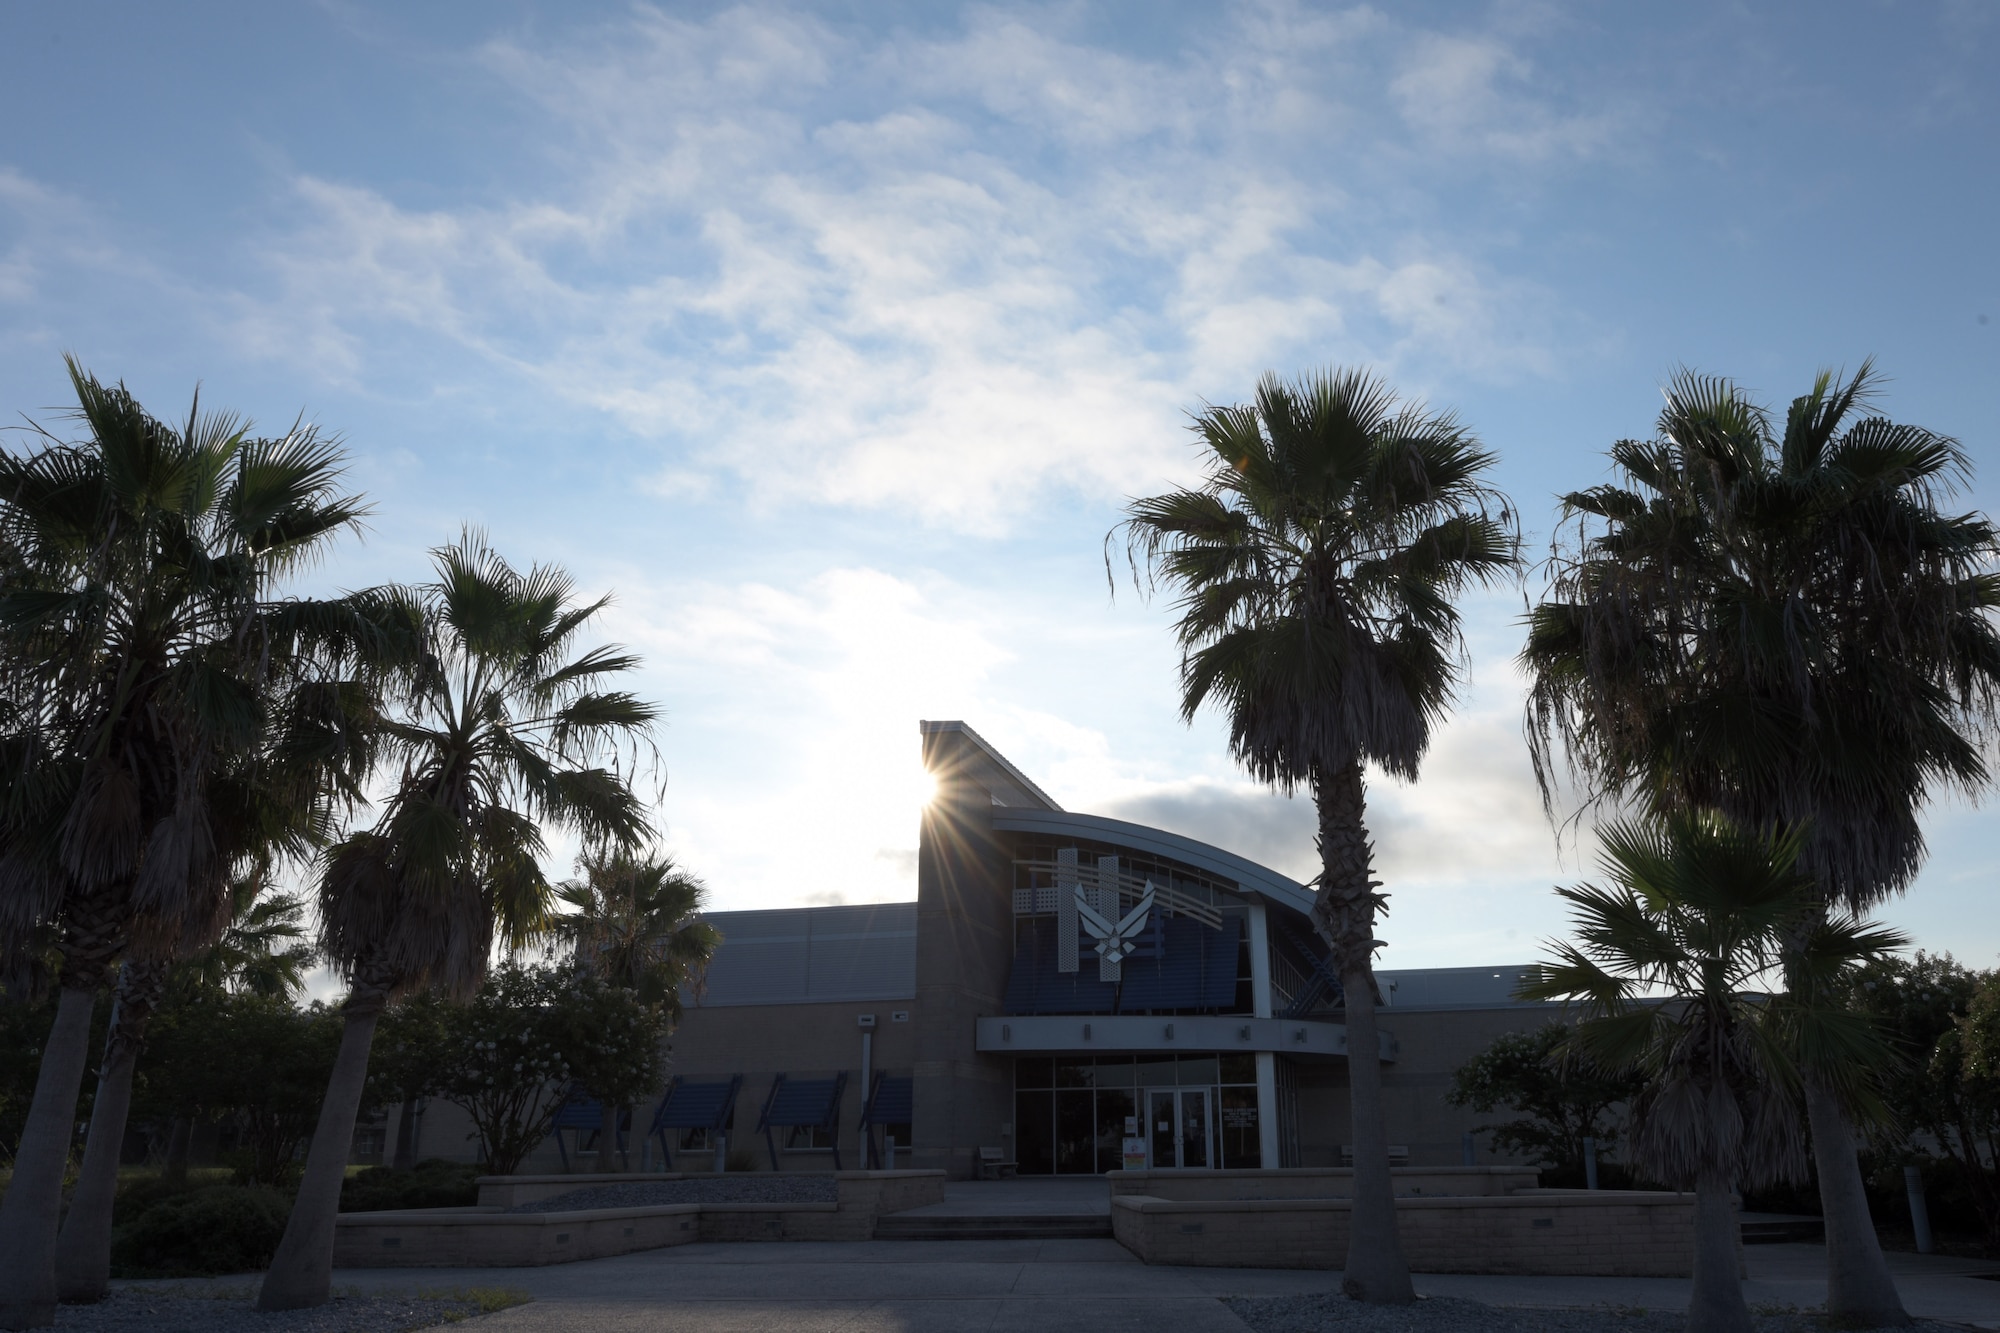 The sun rises behind the Fitness Center